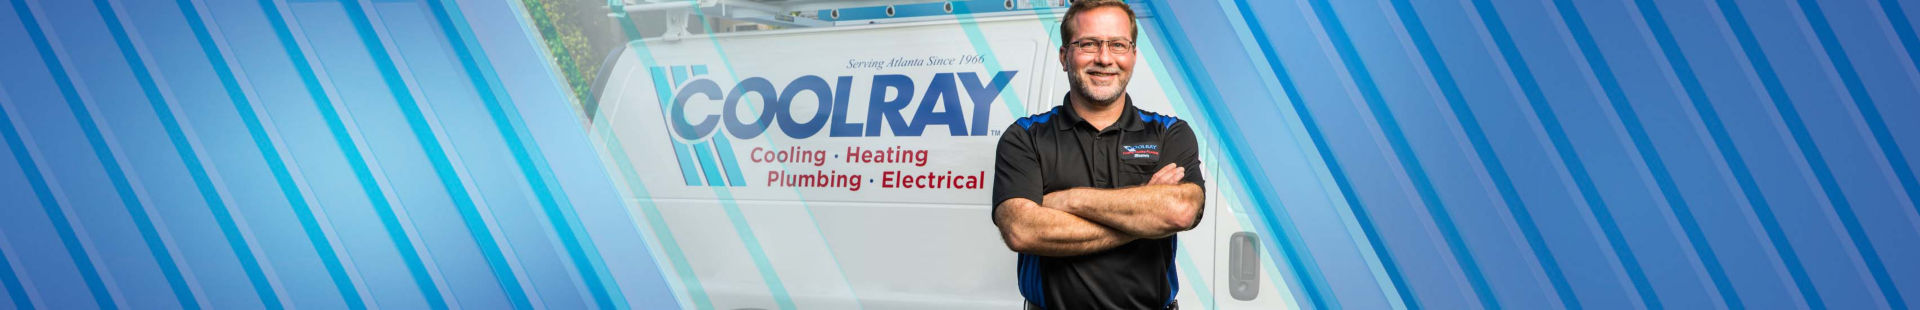 Coolray HVAC tech in front of a service vehicle in Tuscaloosa